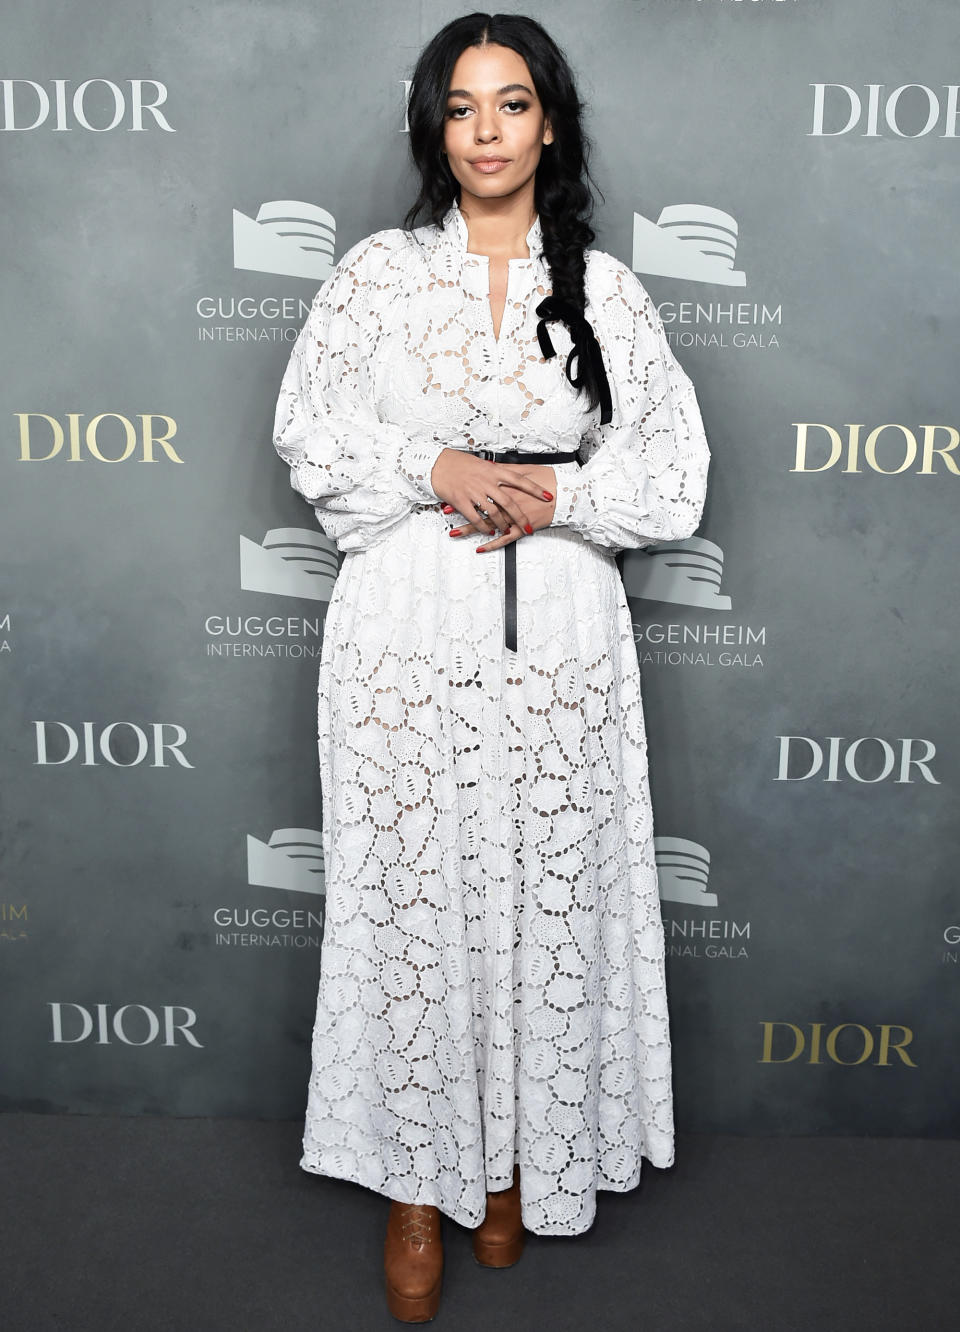 <p>at the 2017 Guggenheim International Pre-Party presented by Dior.</p>